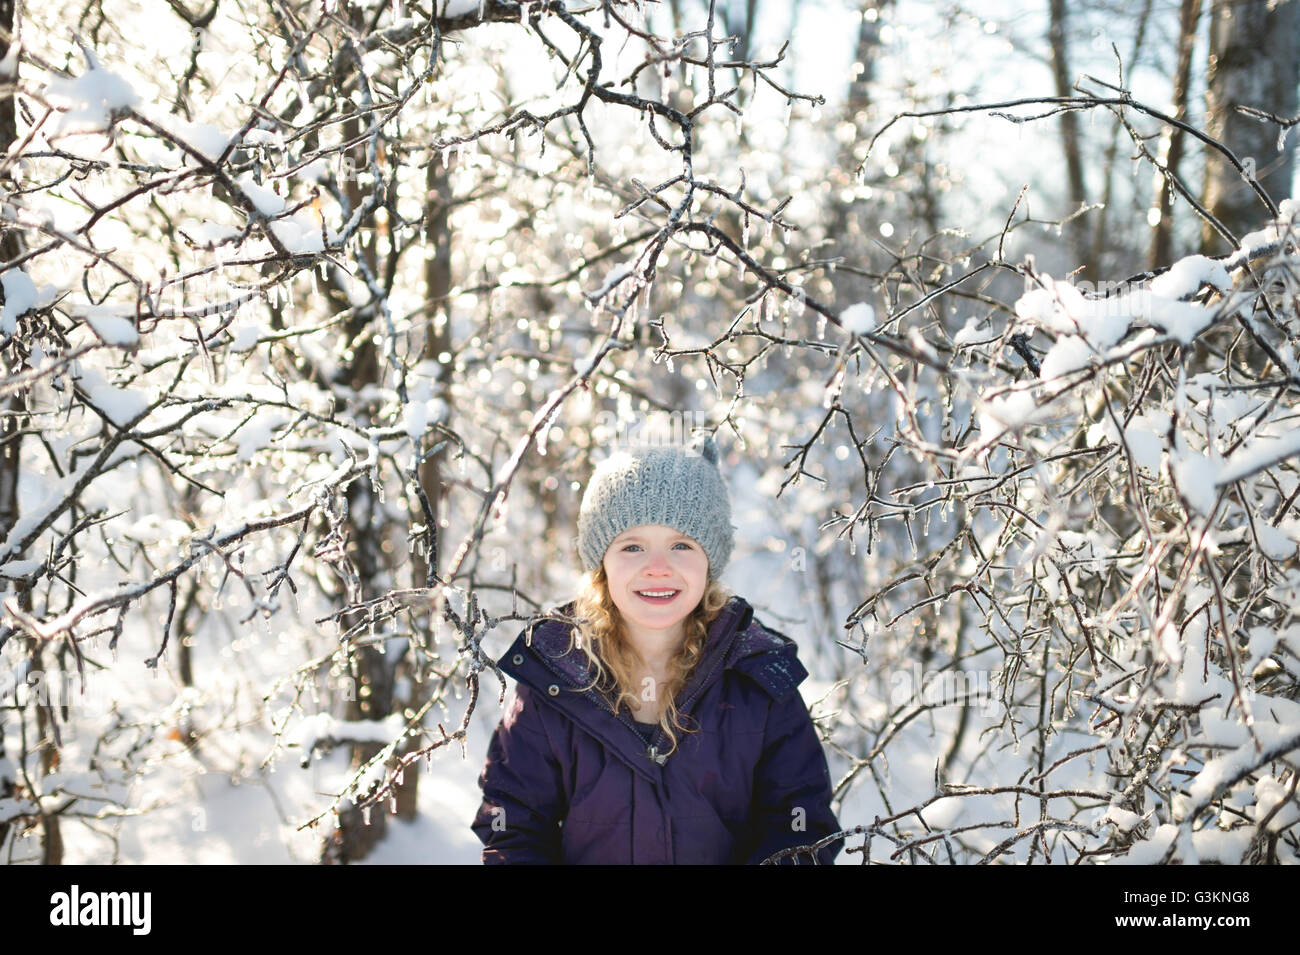 Portrait of young girl in snowy landscape Banque D'Images